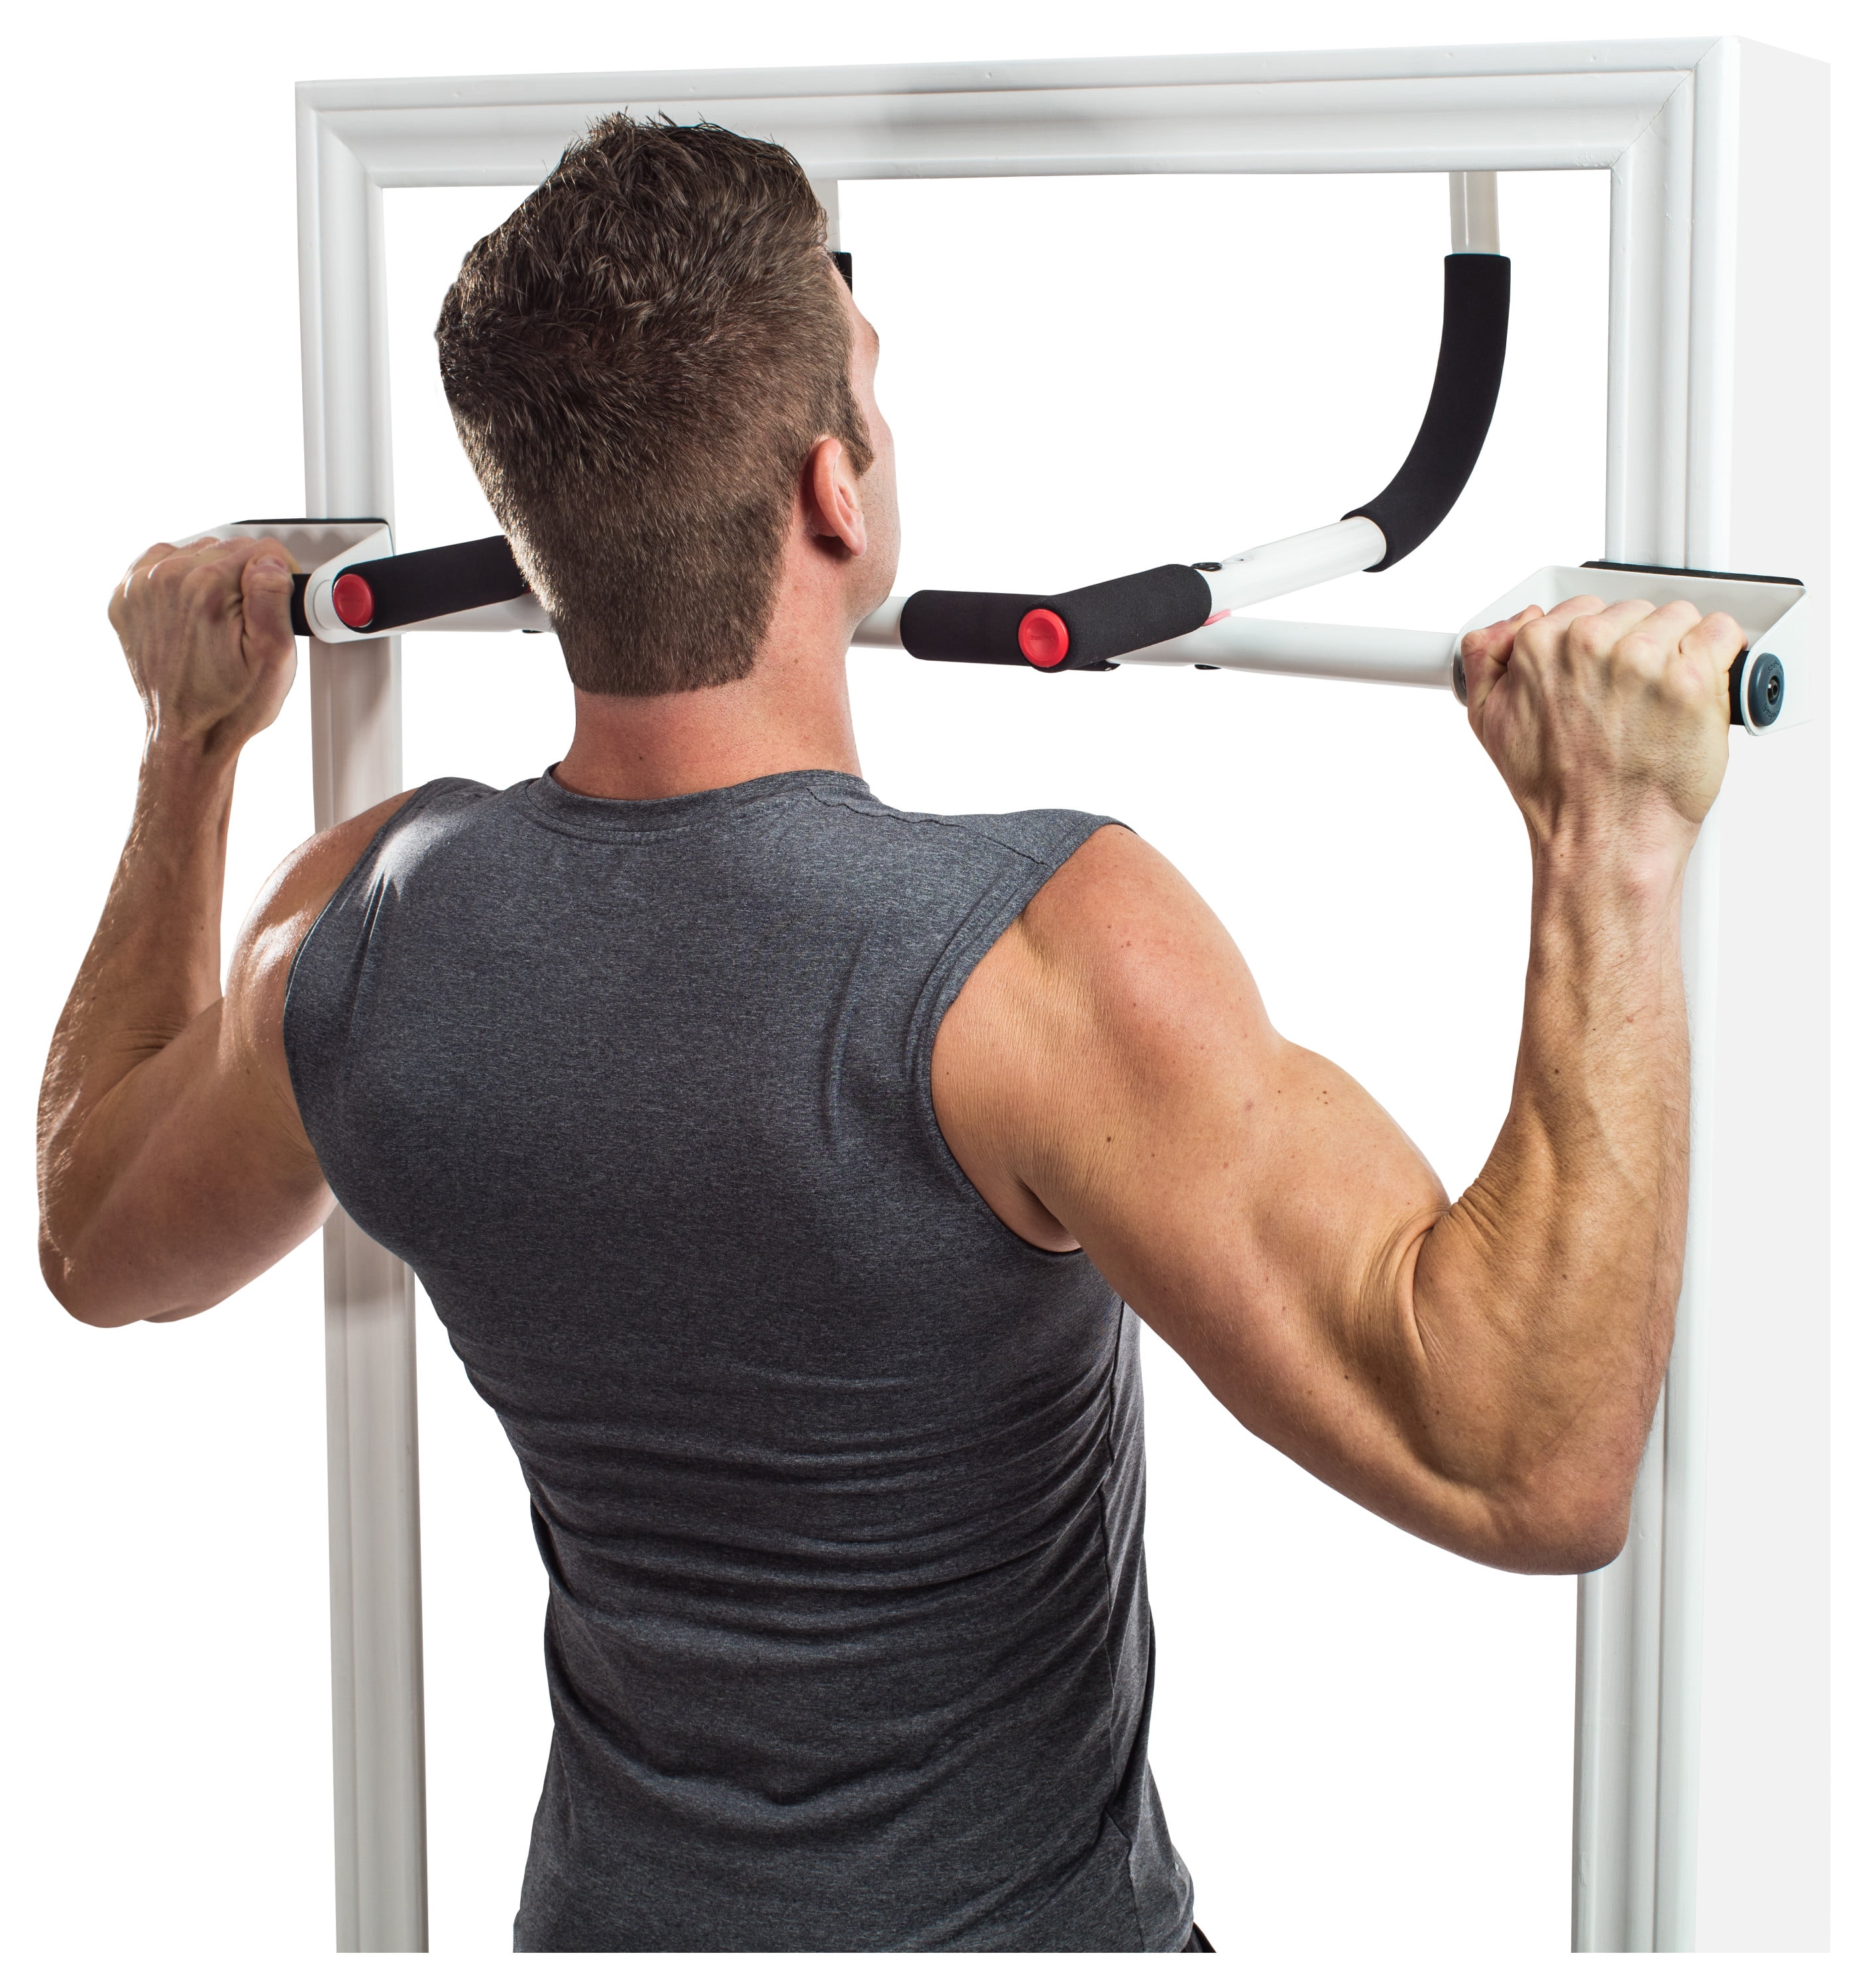 Perfect Fitness Multi-Gym Doorway Pull Up Bar and Portable Gym System